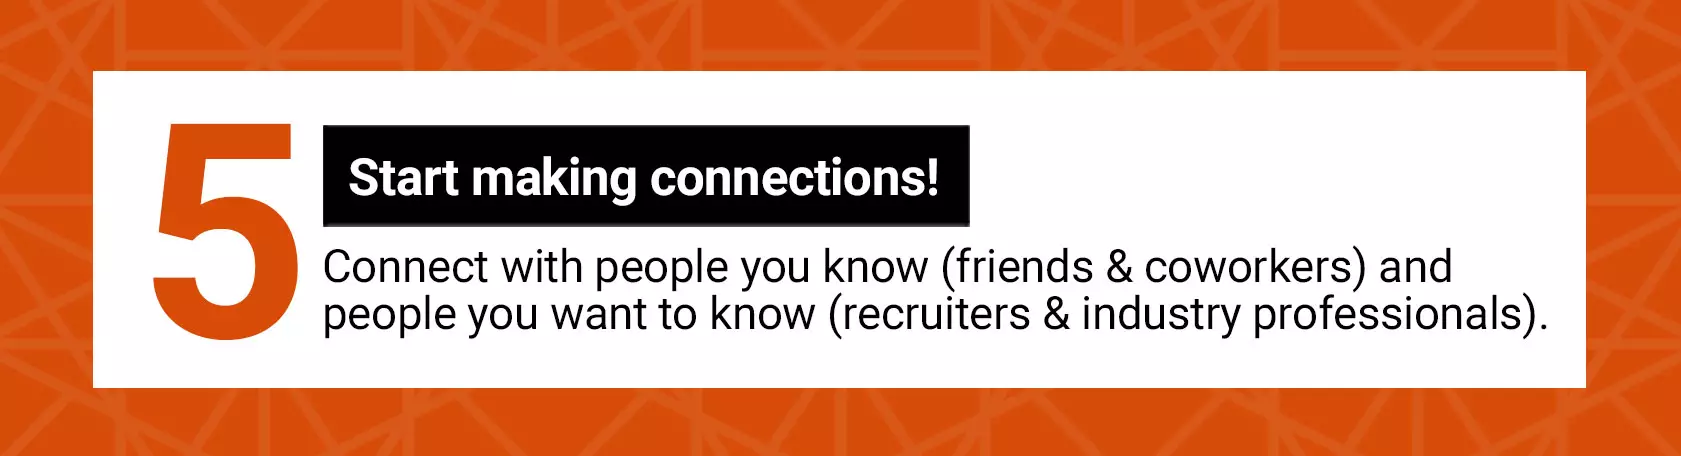 5 Start making connection! Connect with people you know (friends and coworkers) and people you want to knor (recruiters and industry professionals).